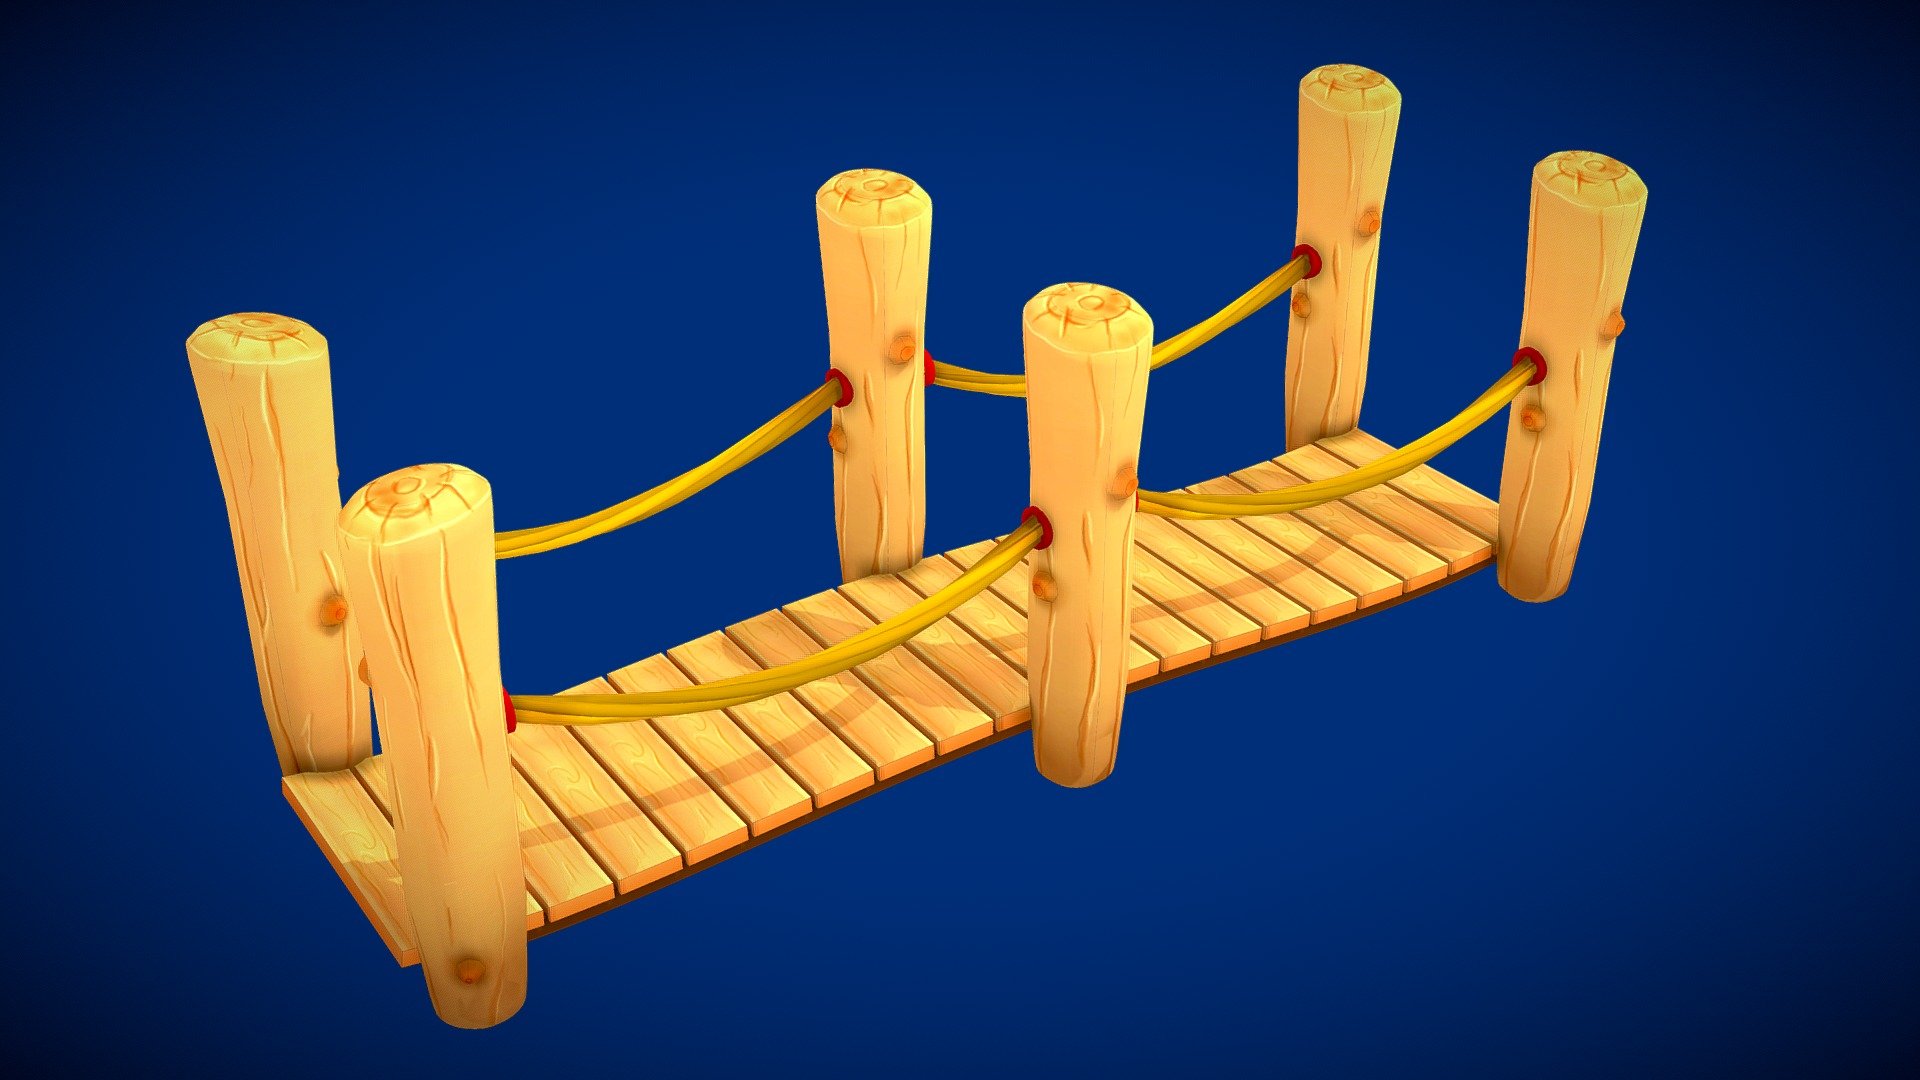 Low Poly model made in Blender

Behold a stunning model of a wooden bridge, where the pillars take the form of sturdy logs, connecting to each other gracefully with natural elegance. Suspended between them, a tactile rope serves as a rustic handhold, inviting you to traverse its charming expanse with a touch of adventure and a dash of rustic charm - Low Poly - Rustic Log Crossing - 3D model by land4land (@land4land1) 3d model